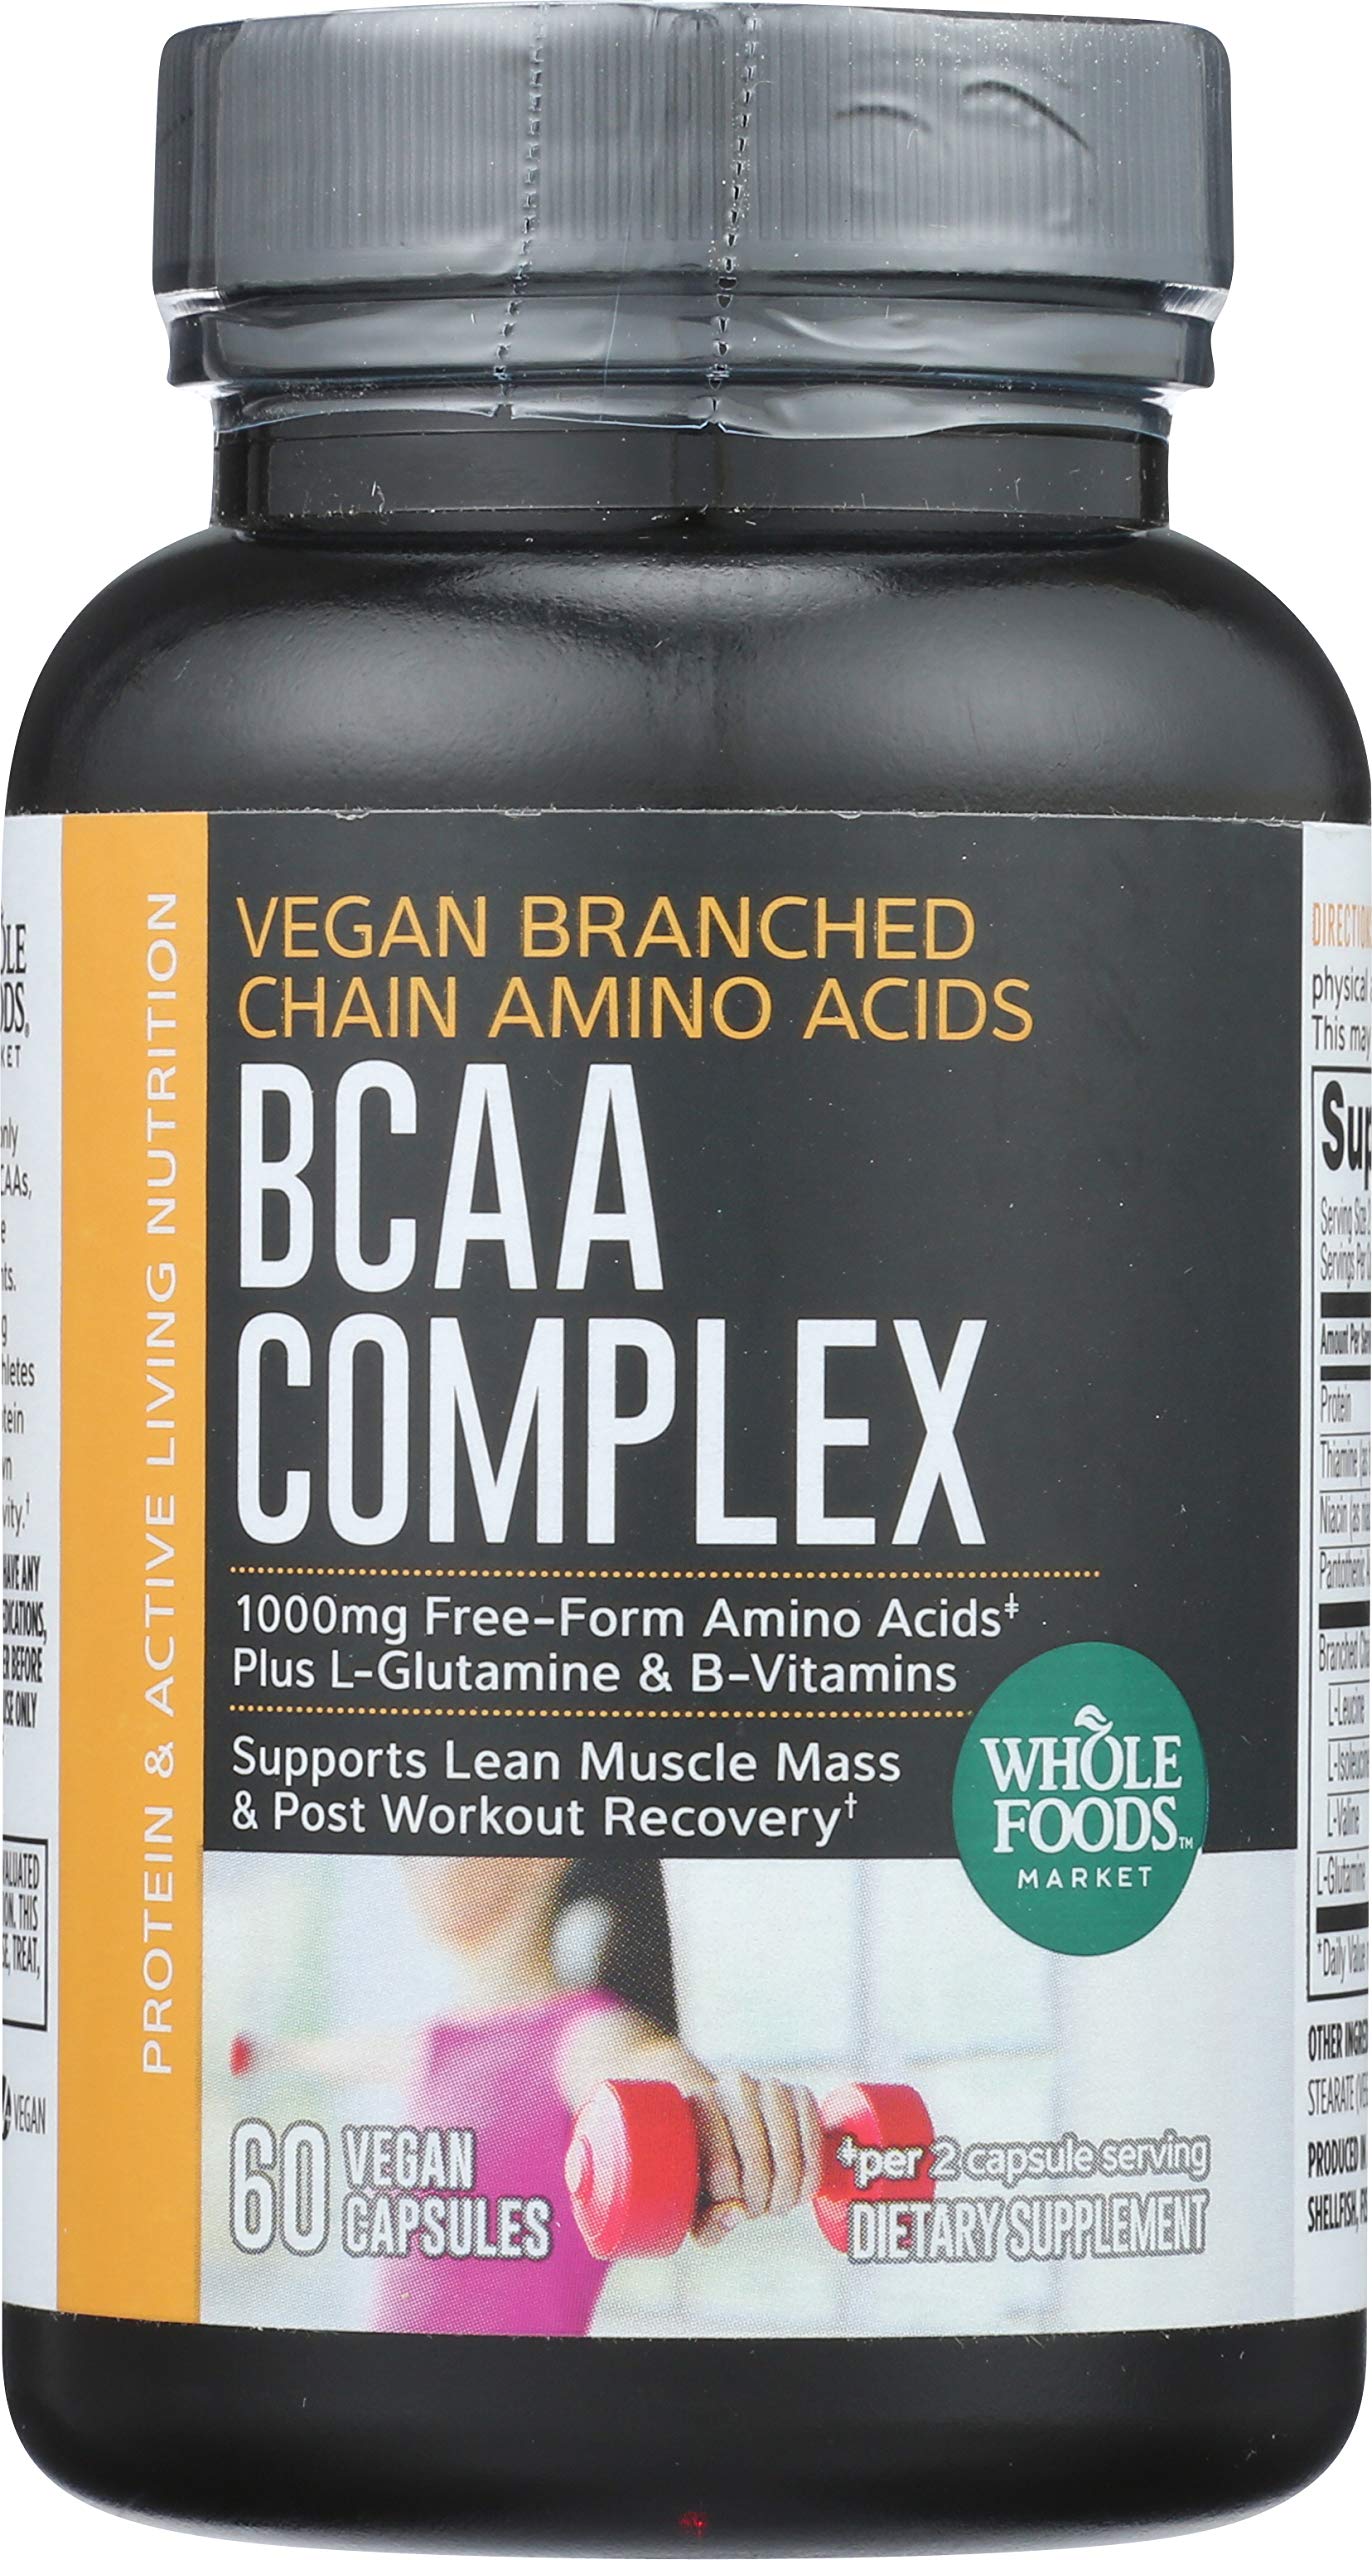 Whole Foods Market, BCAA Complex, 60 ct